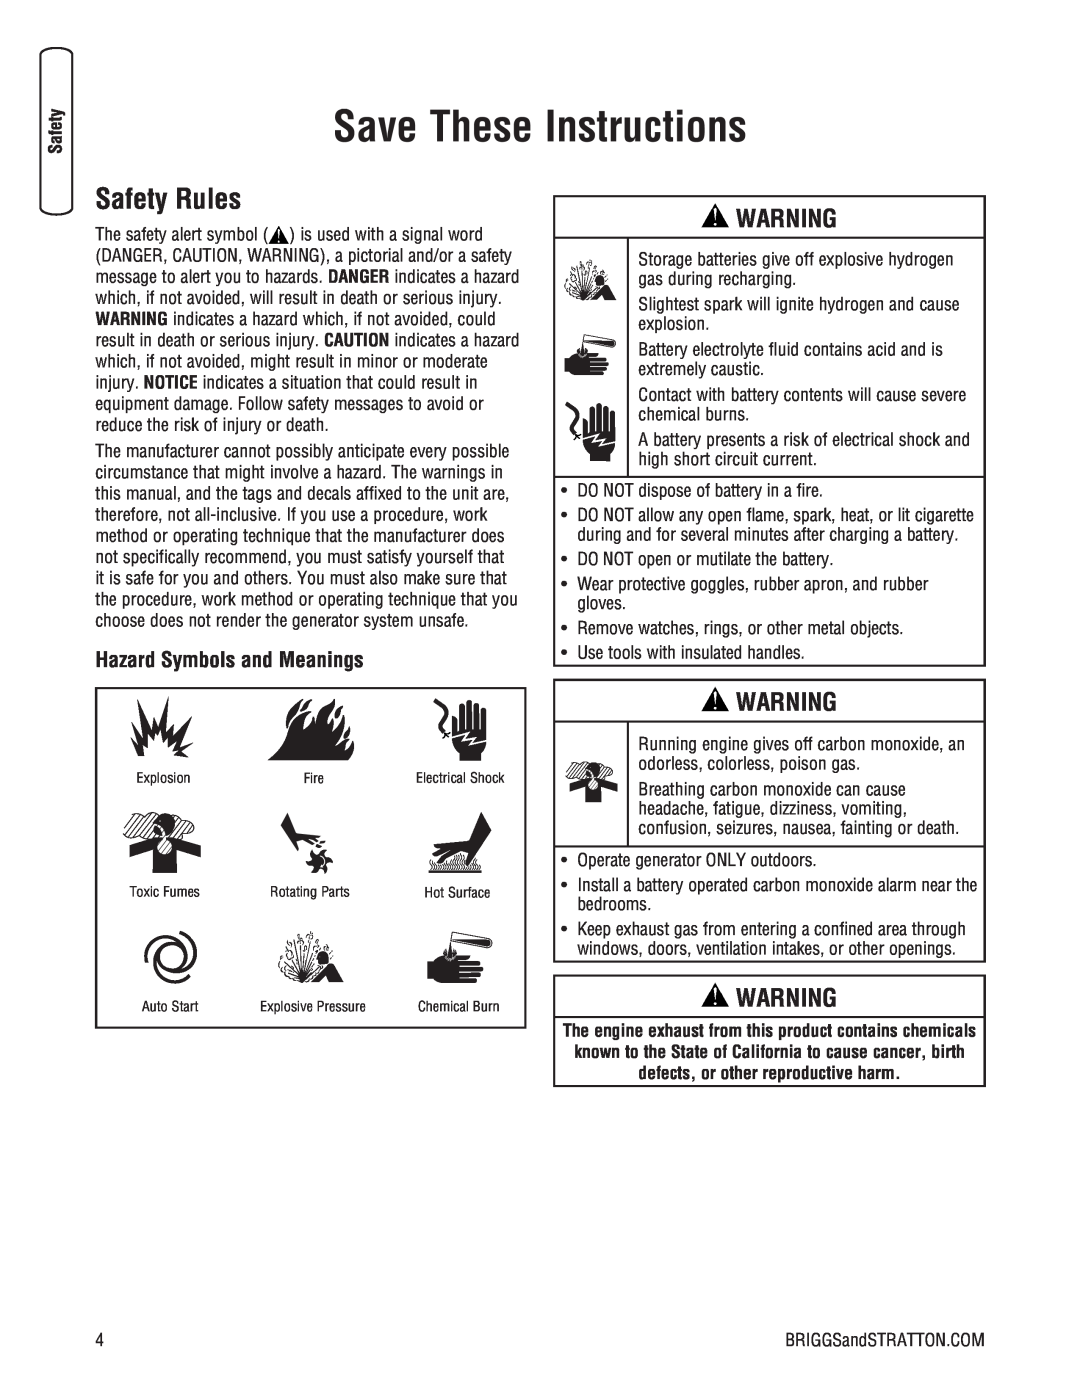 Briggs & Stratton 205051GS system manual Save These Instructions, Safety Rules, Hazard Symbols and Meanings 